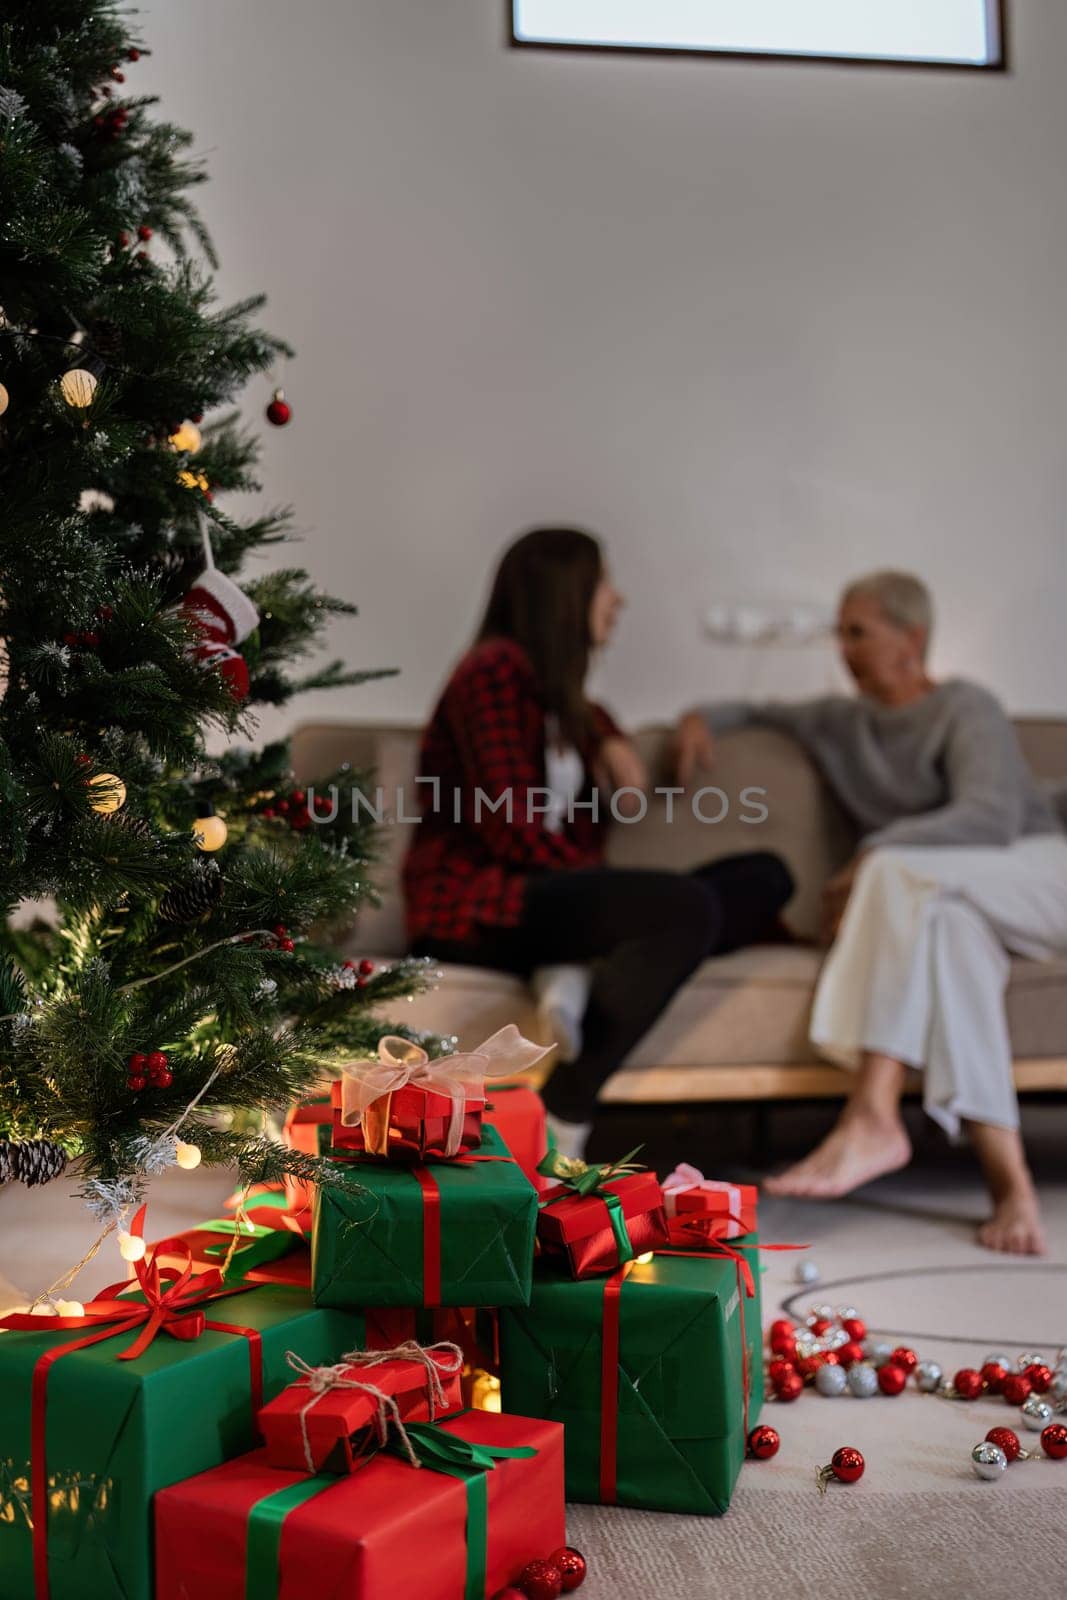 Beautiful Christmas gift boxes on floor near Christmas tree and have people background in room.